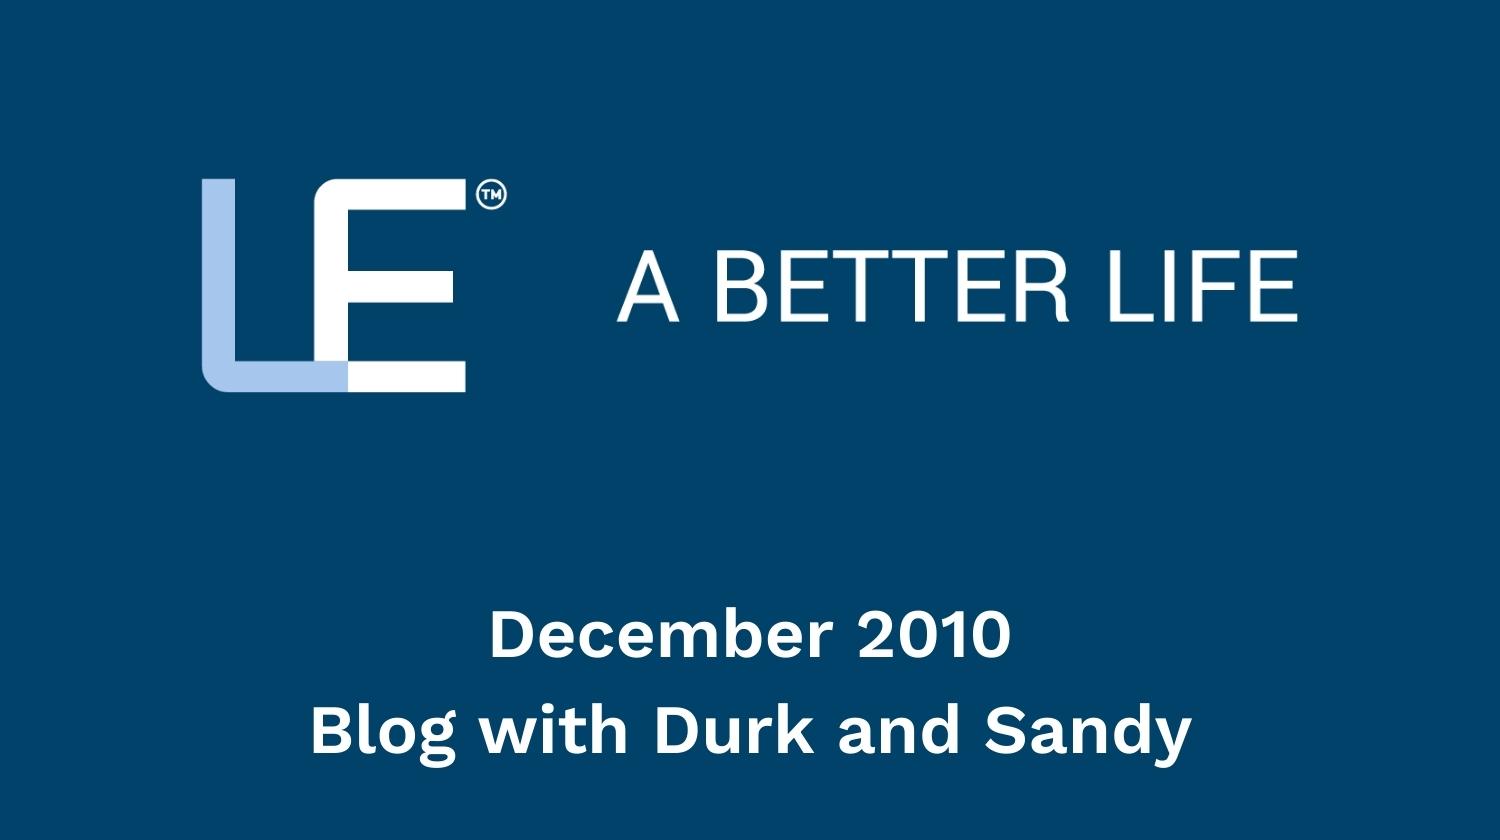 December 2010 Blog with Durk and Sandy